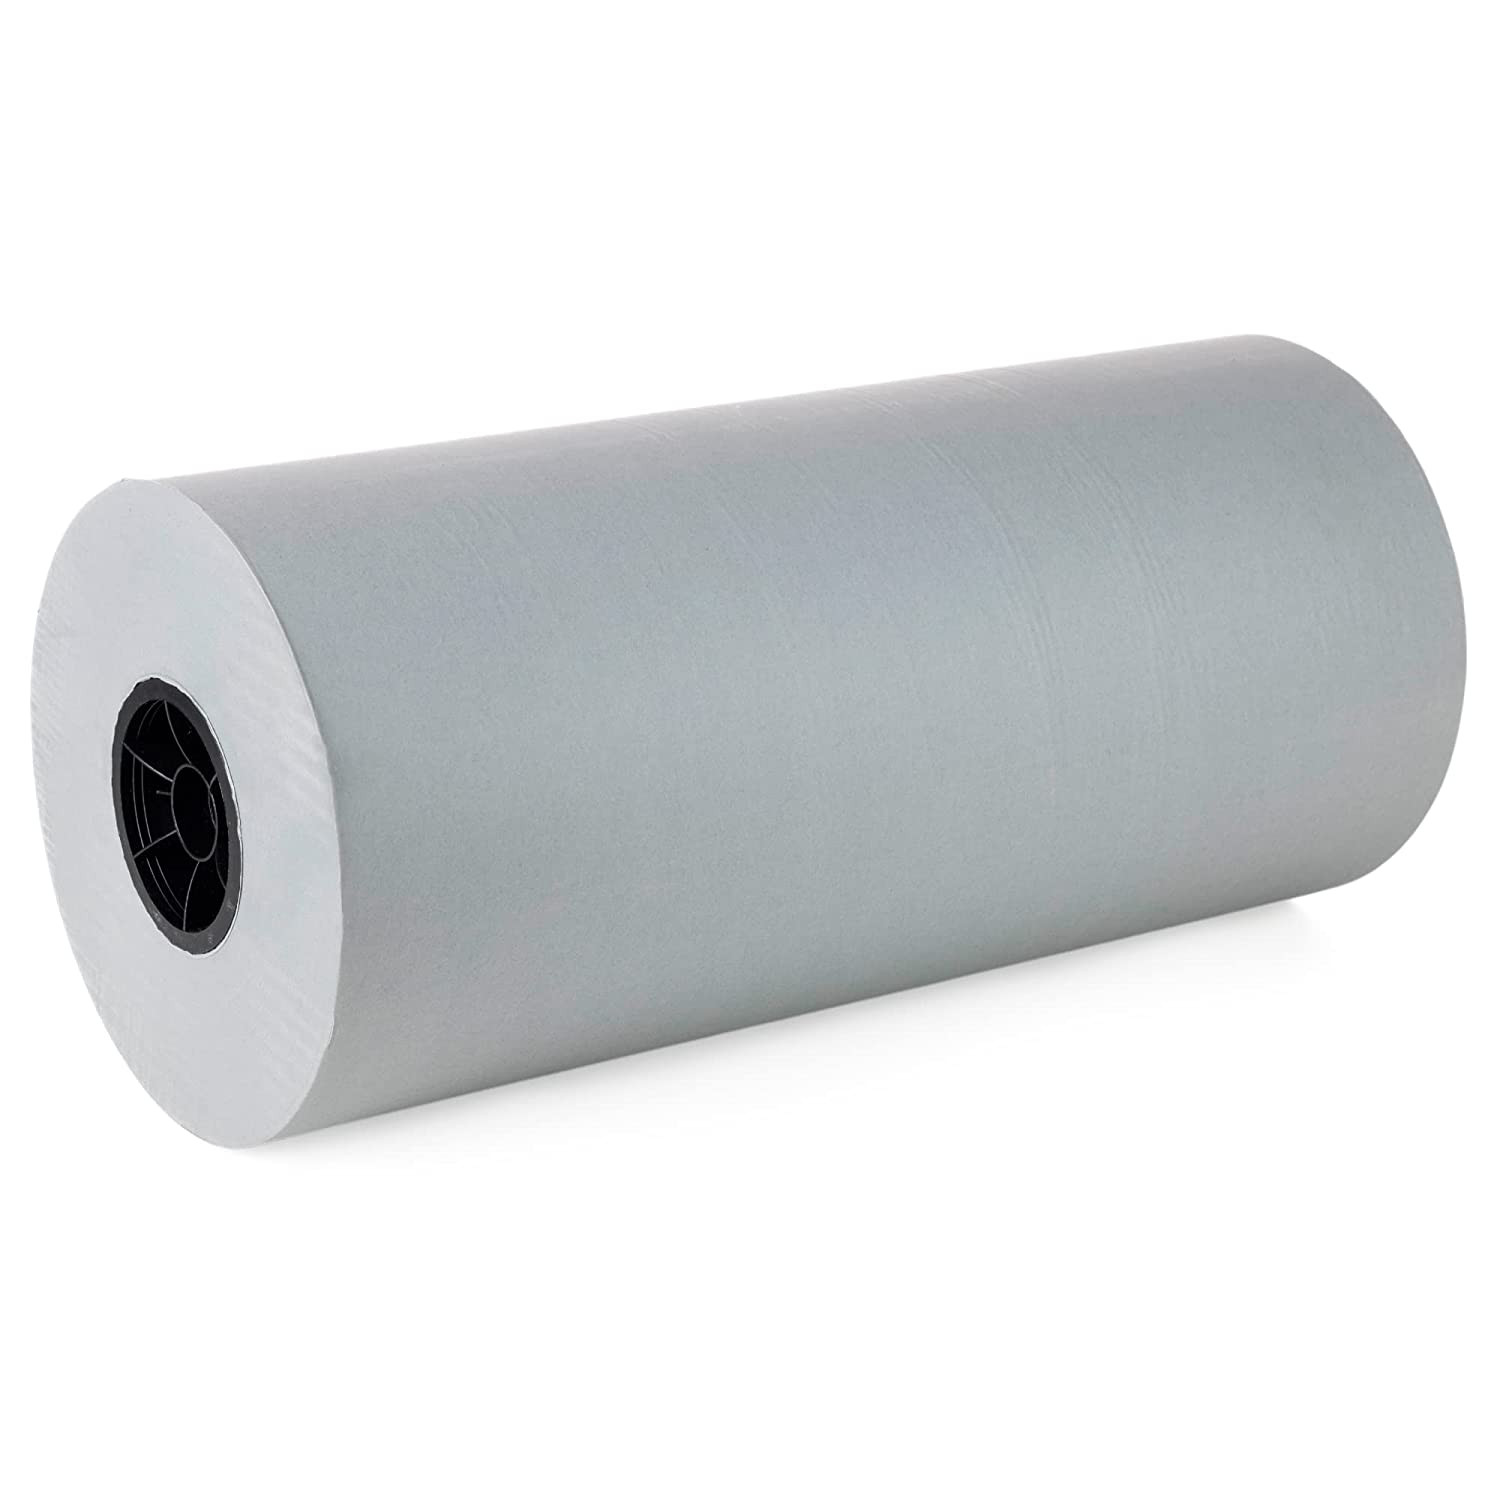 Idl Packaging 18 x 1800' SatinPack Tissue Paper Roll, 20 Basis Weight, White Color - Acid-Free Decorative Tissue Paper for Packaging Clothing